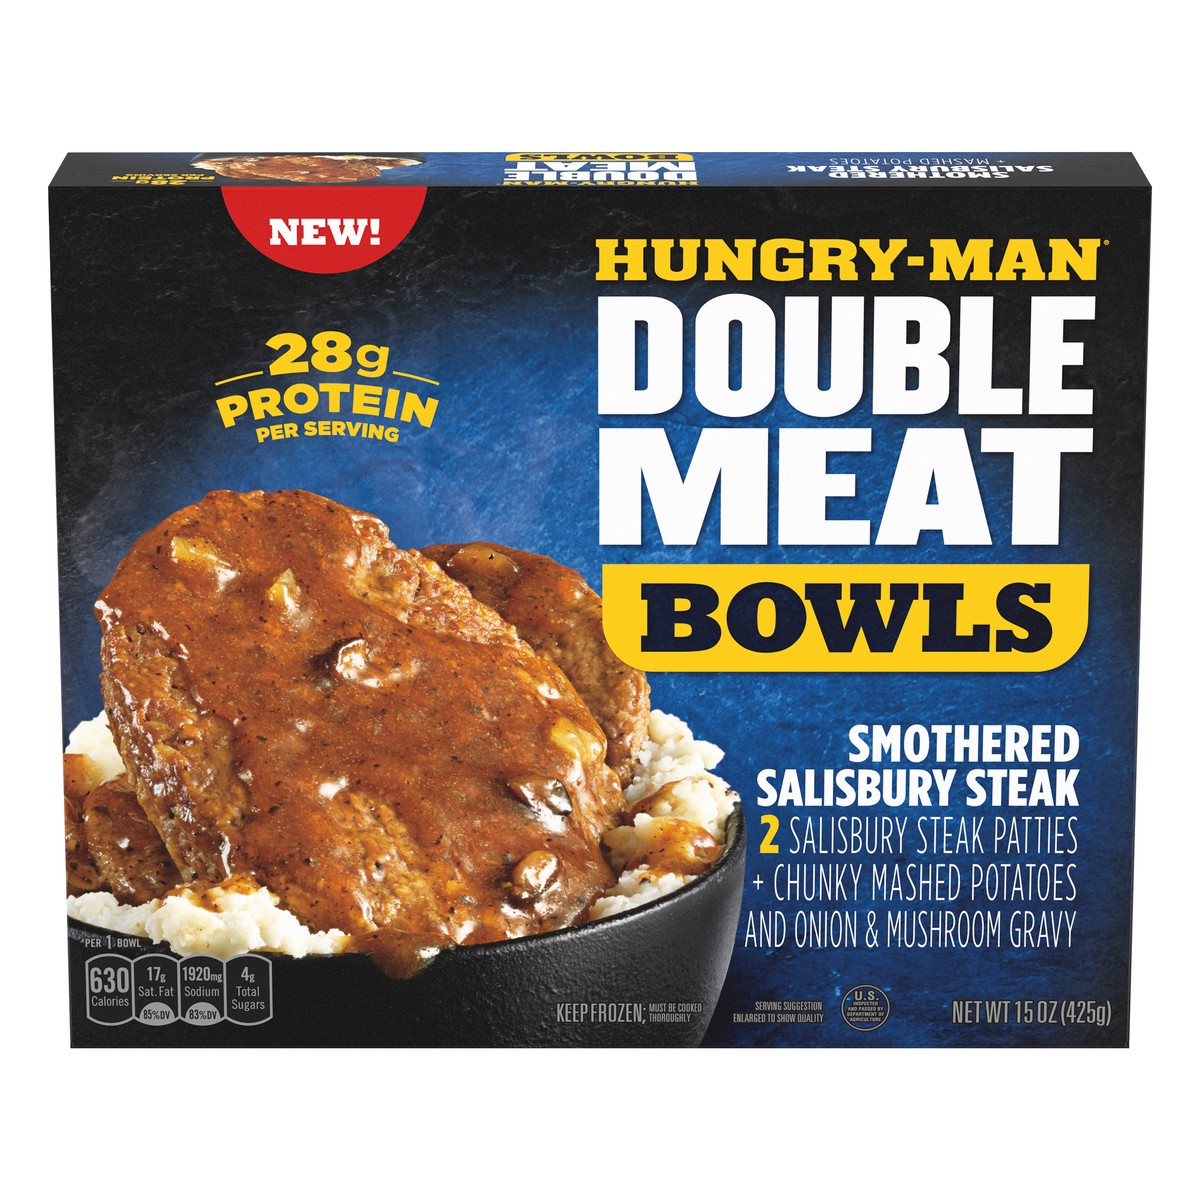 slide 1 of 10, Hungry-Man Double Meat Smothered Salisbury Steak Mashed Potatoes And Gravy Frozen Protein Bowl, 15 oz